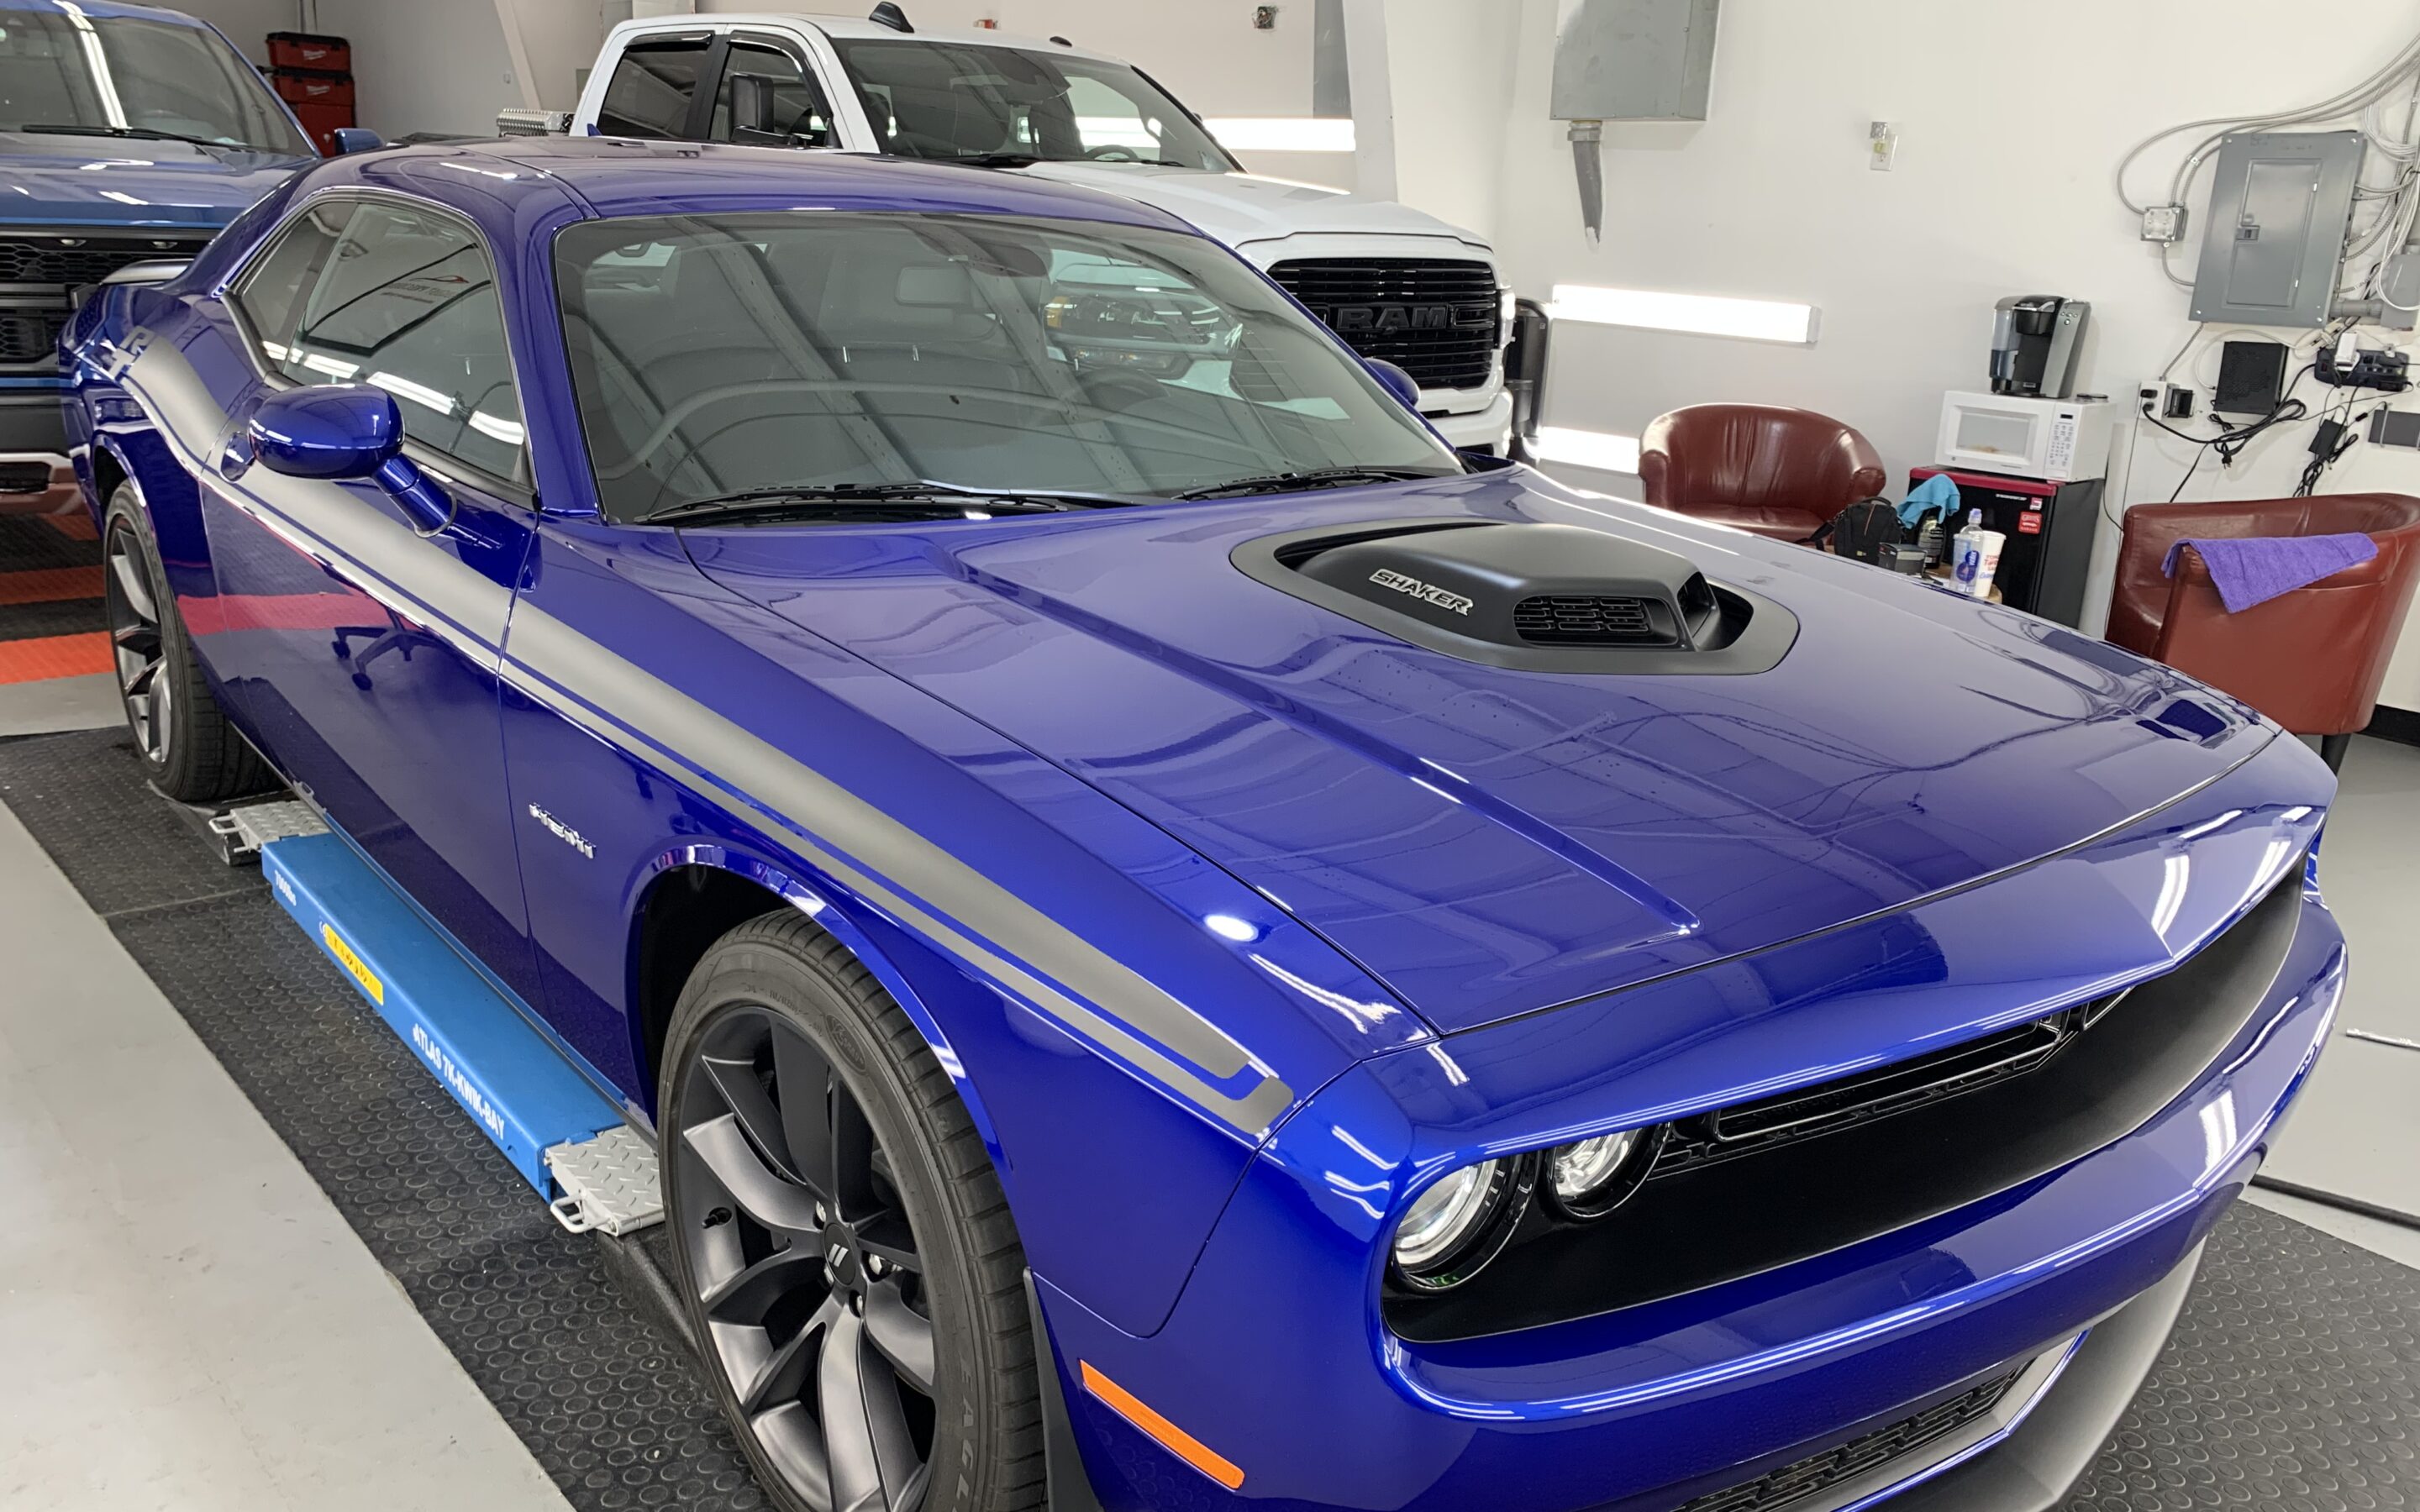 Photo of a New Car Preparation of a 2021 Dodge Challenger